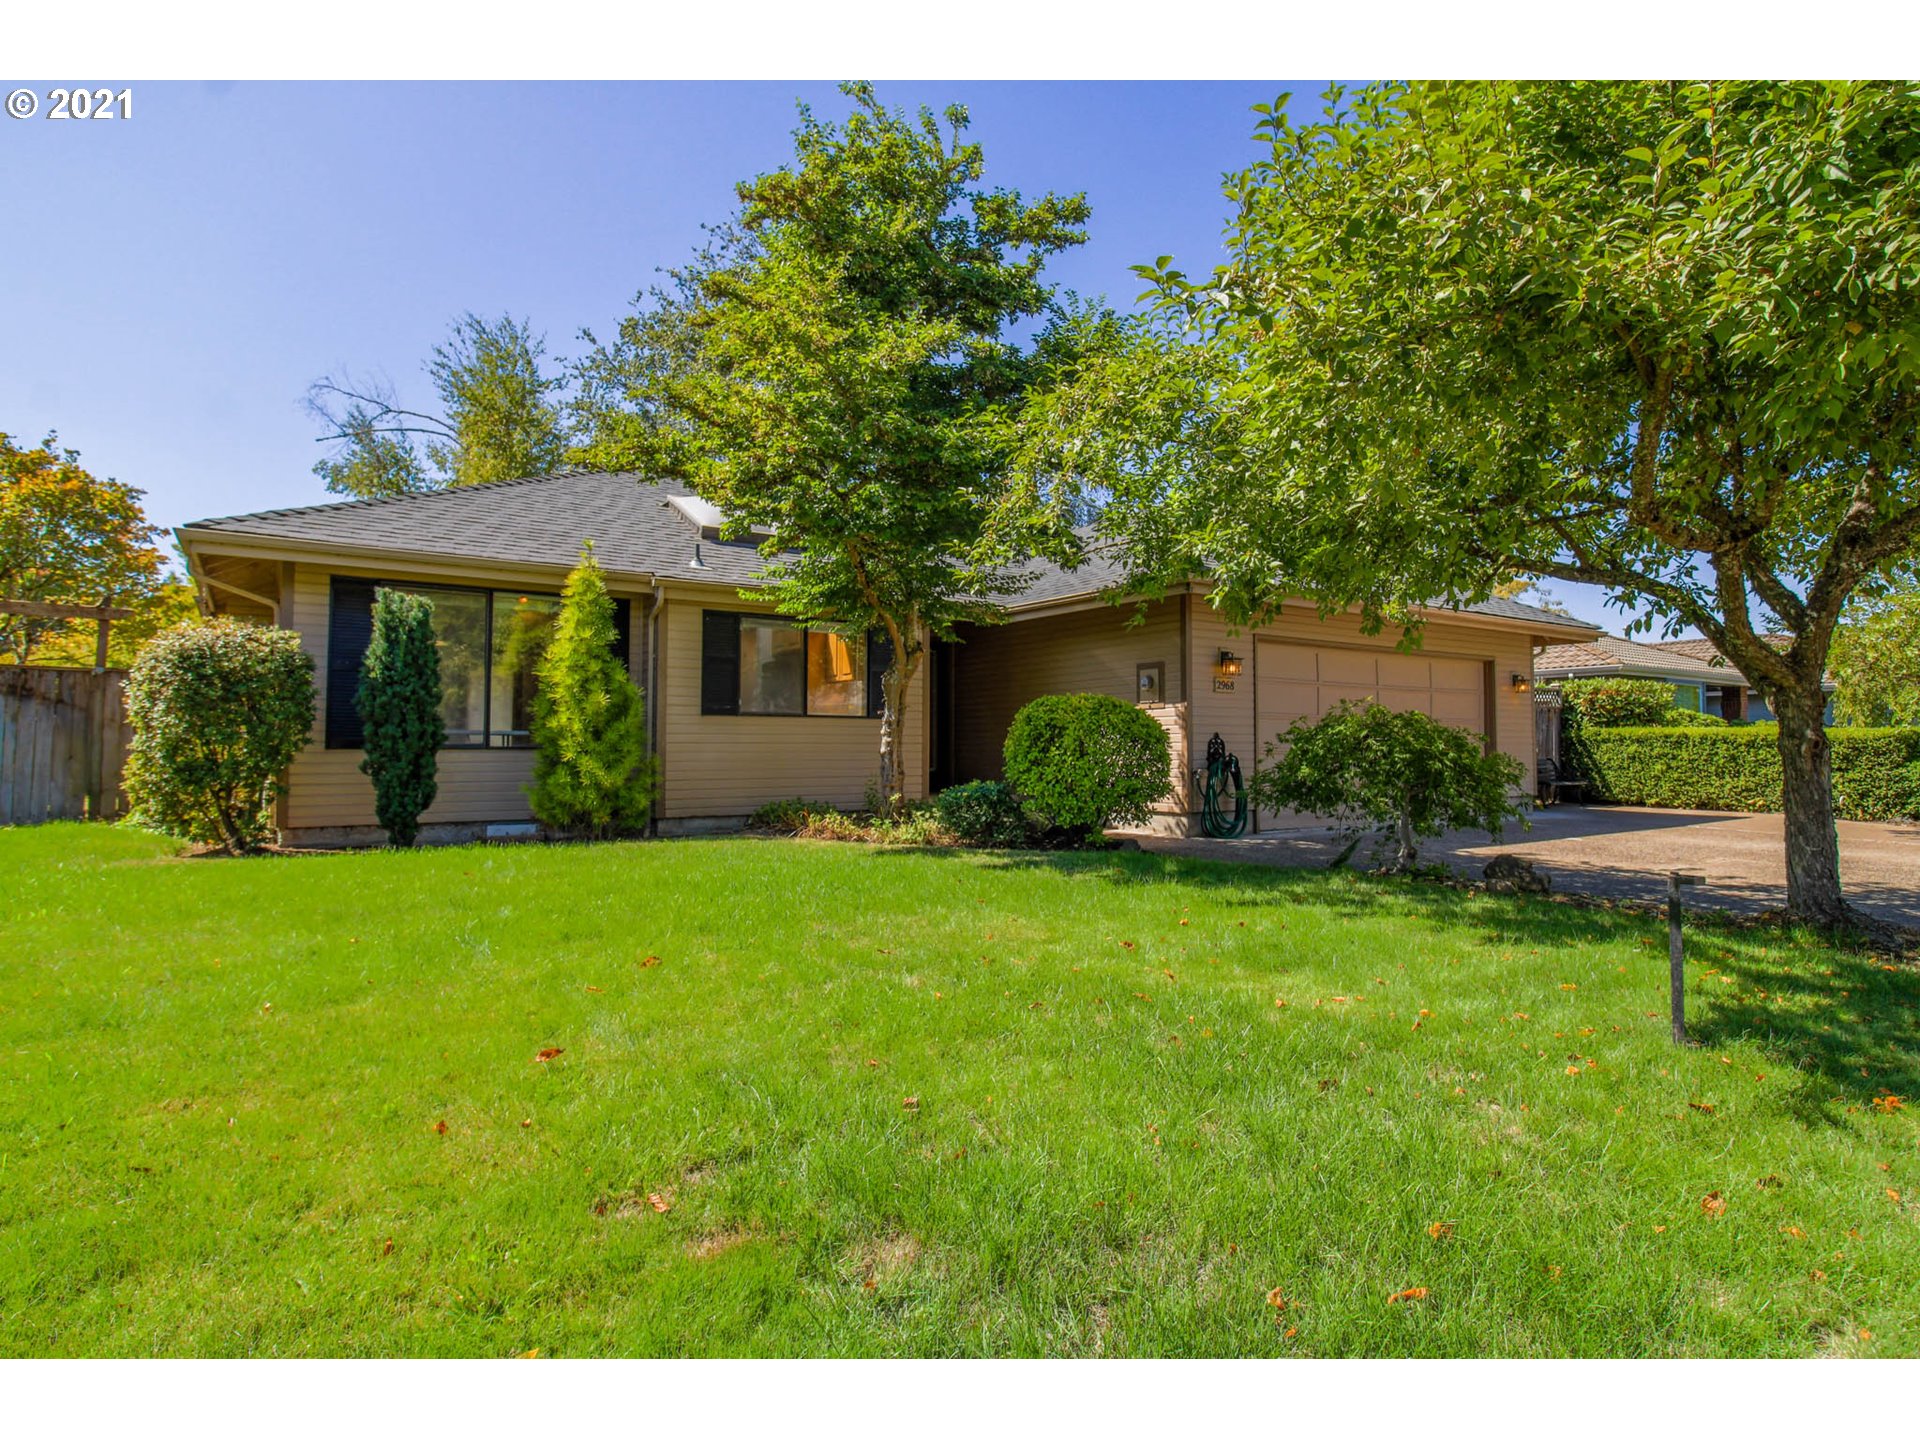 2968 WOLF MEADOWS LN (1 of 31)